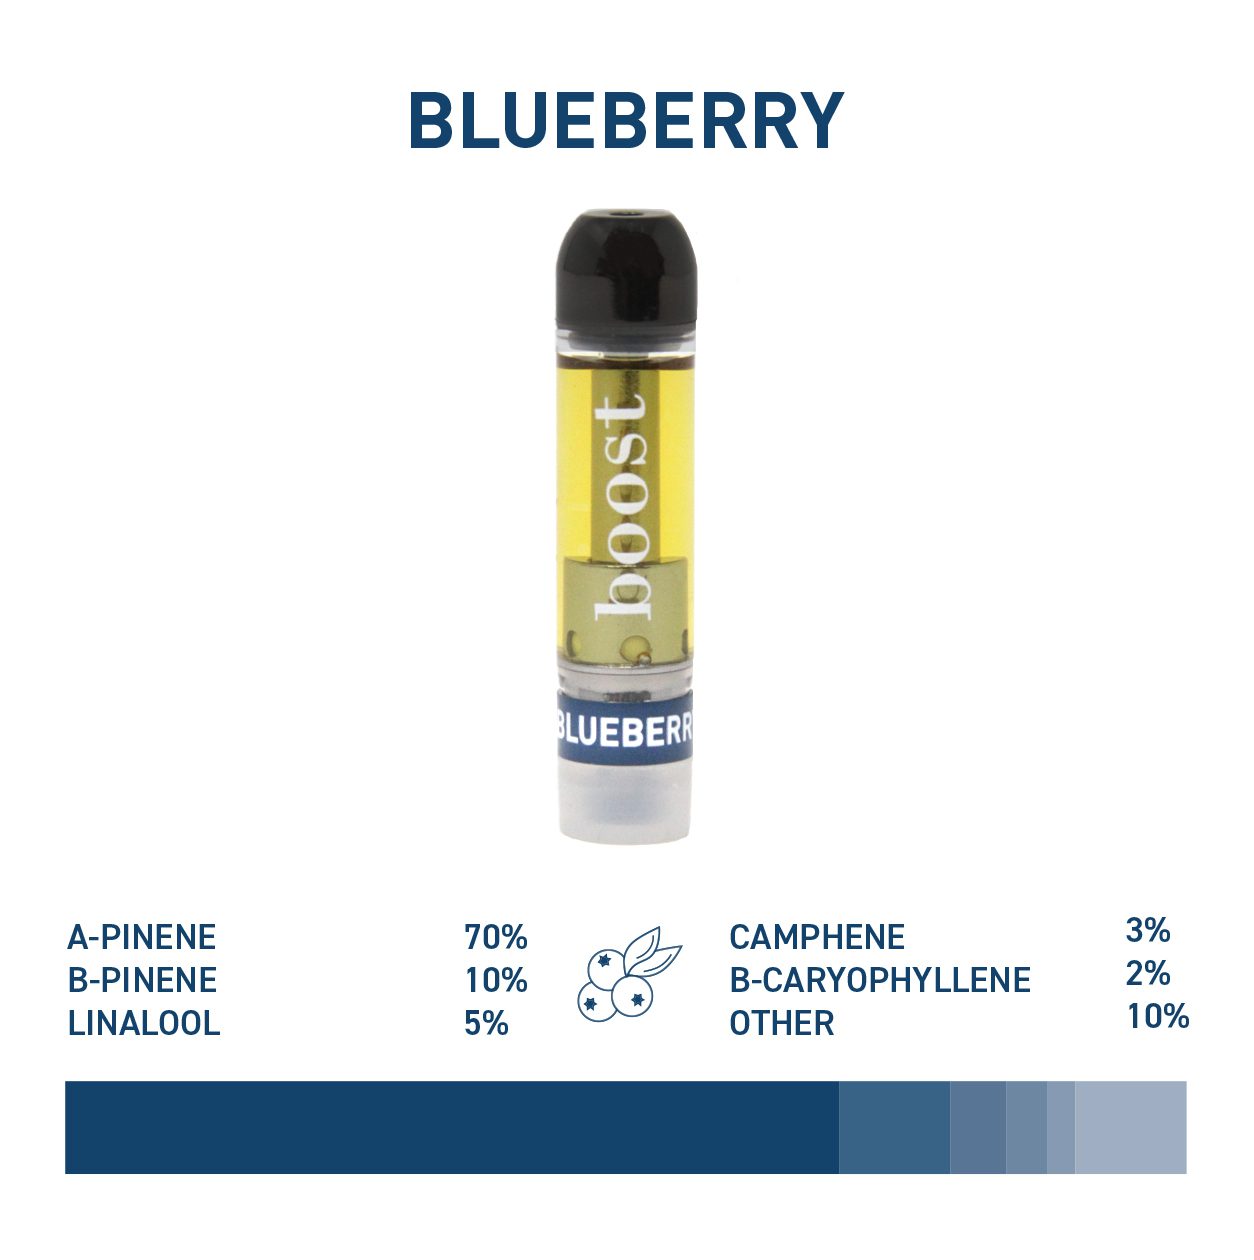 Boost Blueberry Vape Cart Pic - Cannabis Deals In Canada